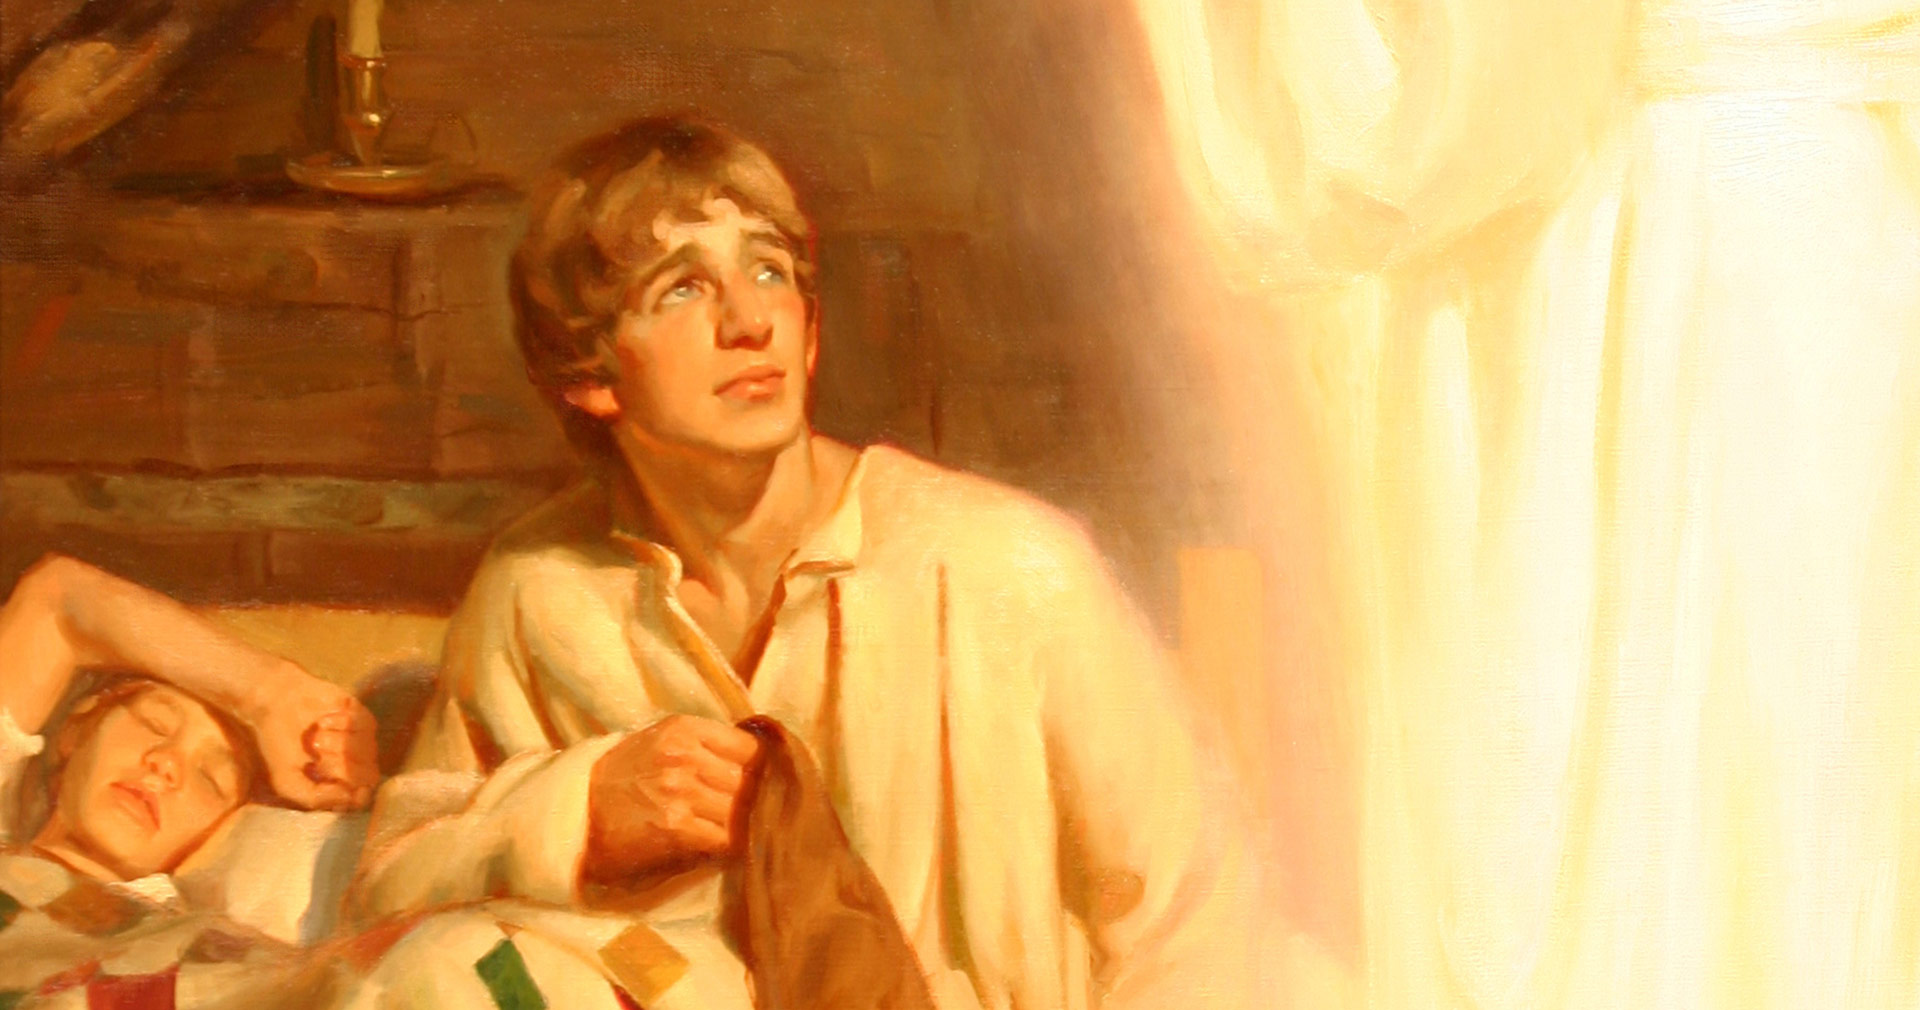 He Called Me by Name, by Michael Malm. Image via Church of Jesus Christ.